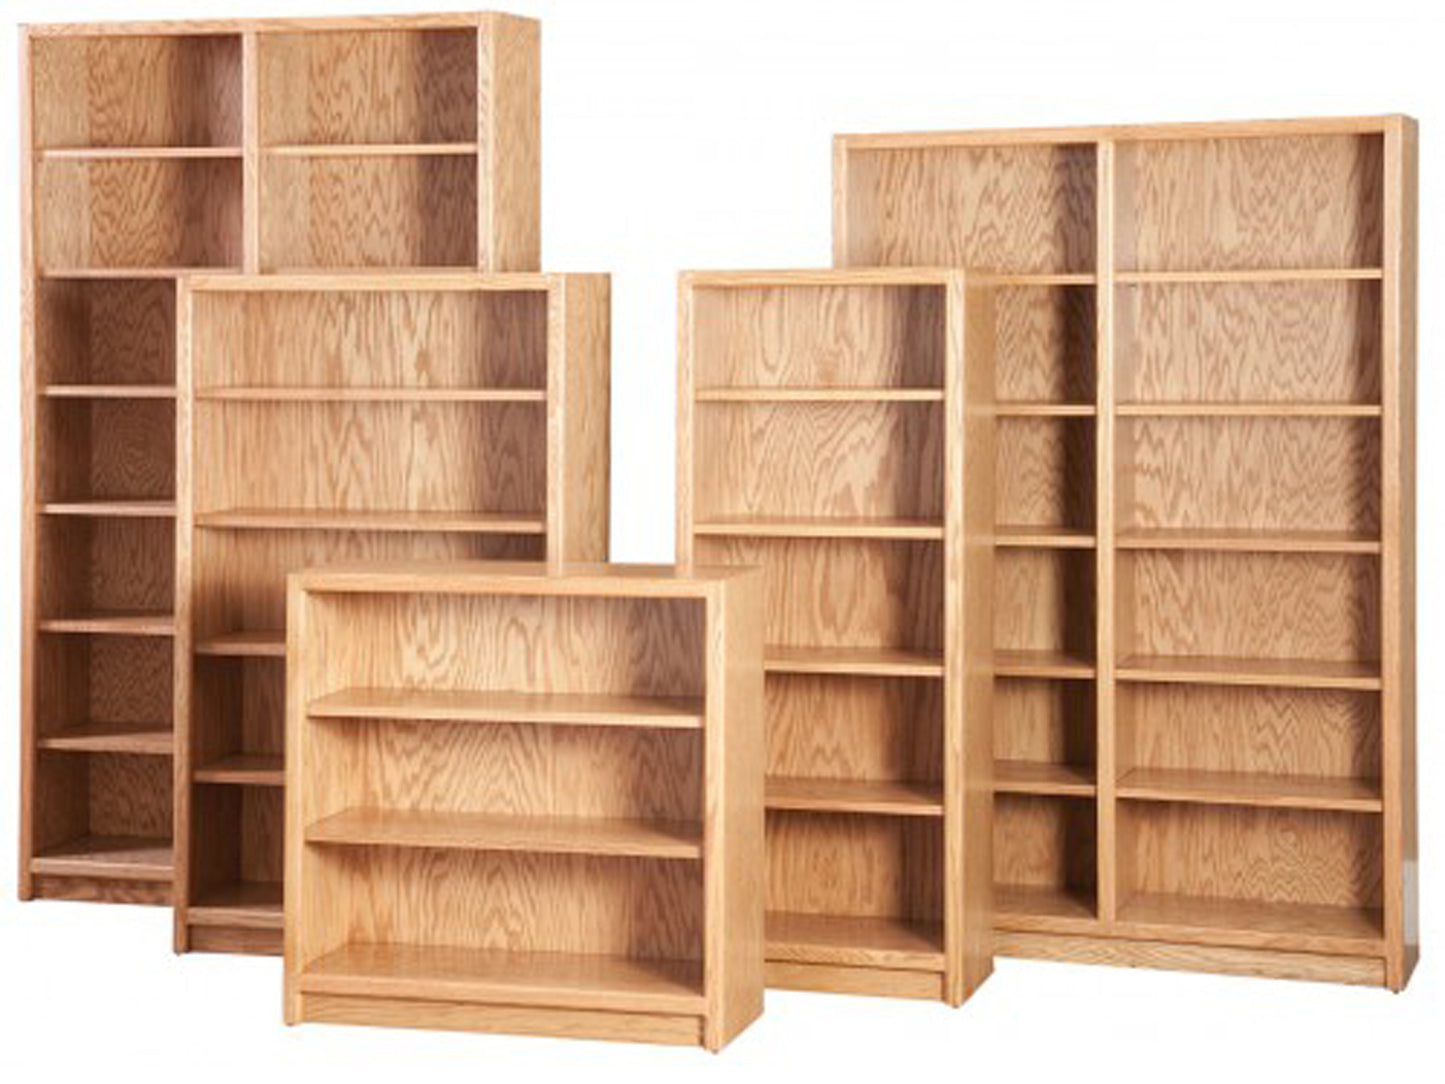 Contemporary Bookcases by Woodworks - solid wood, locally built, made to order